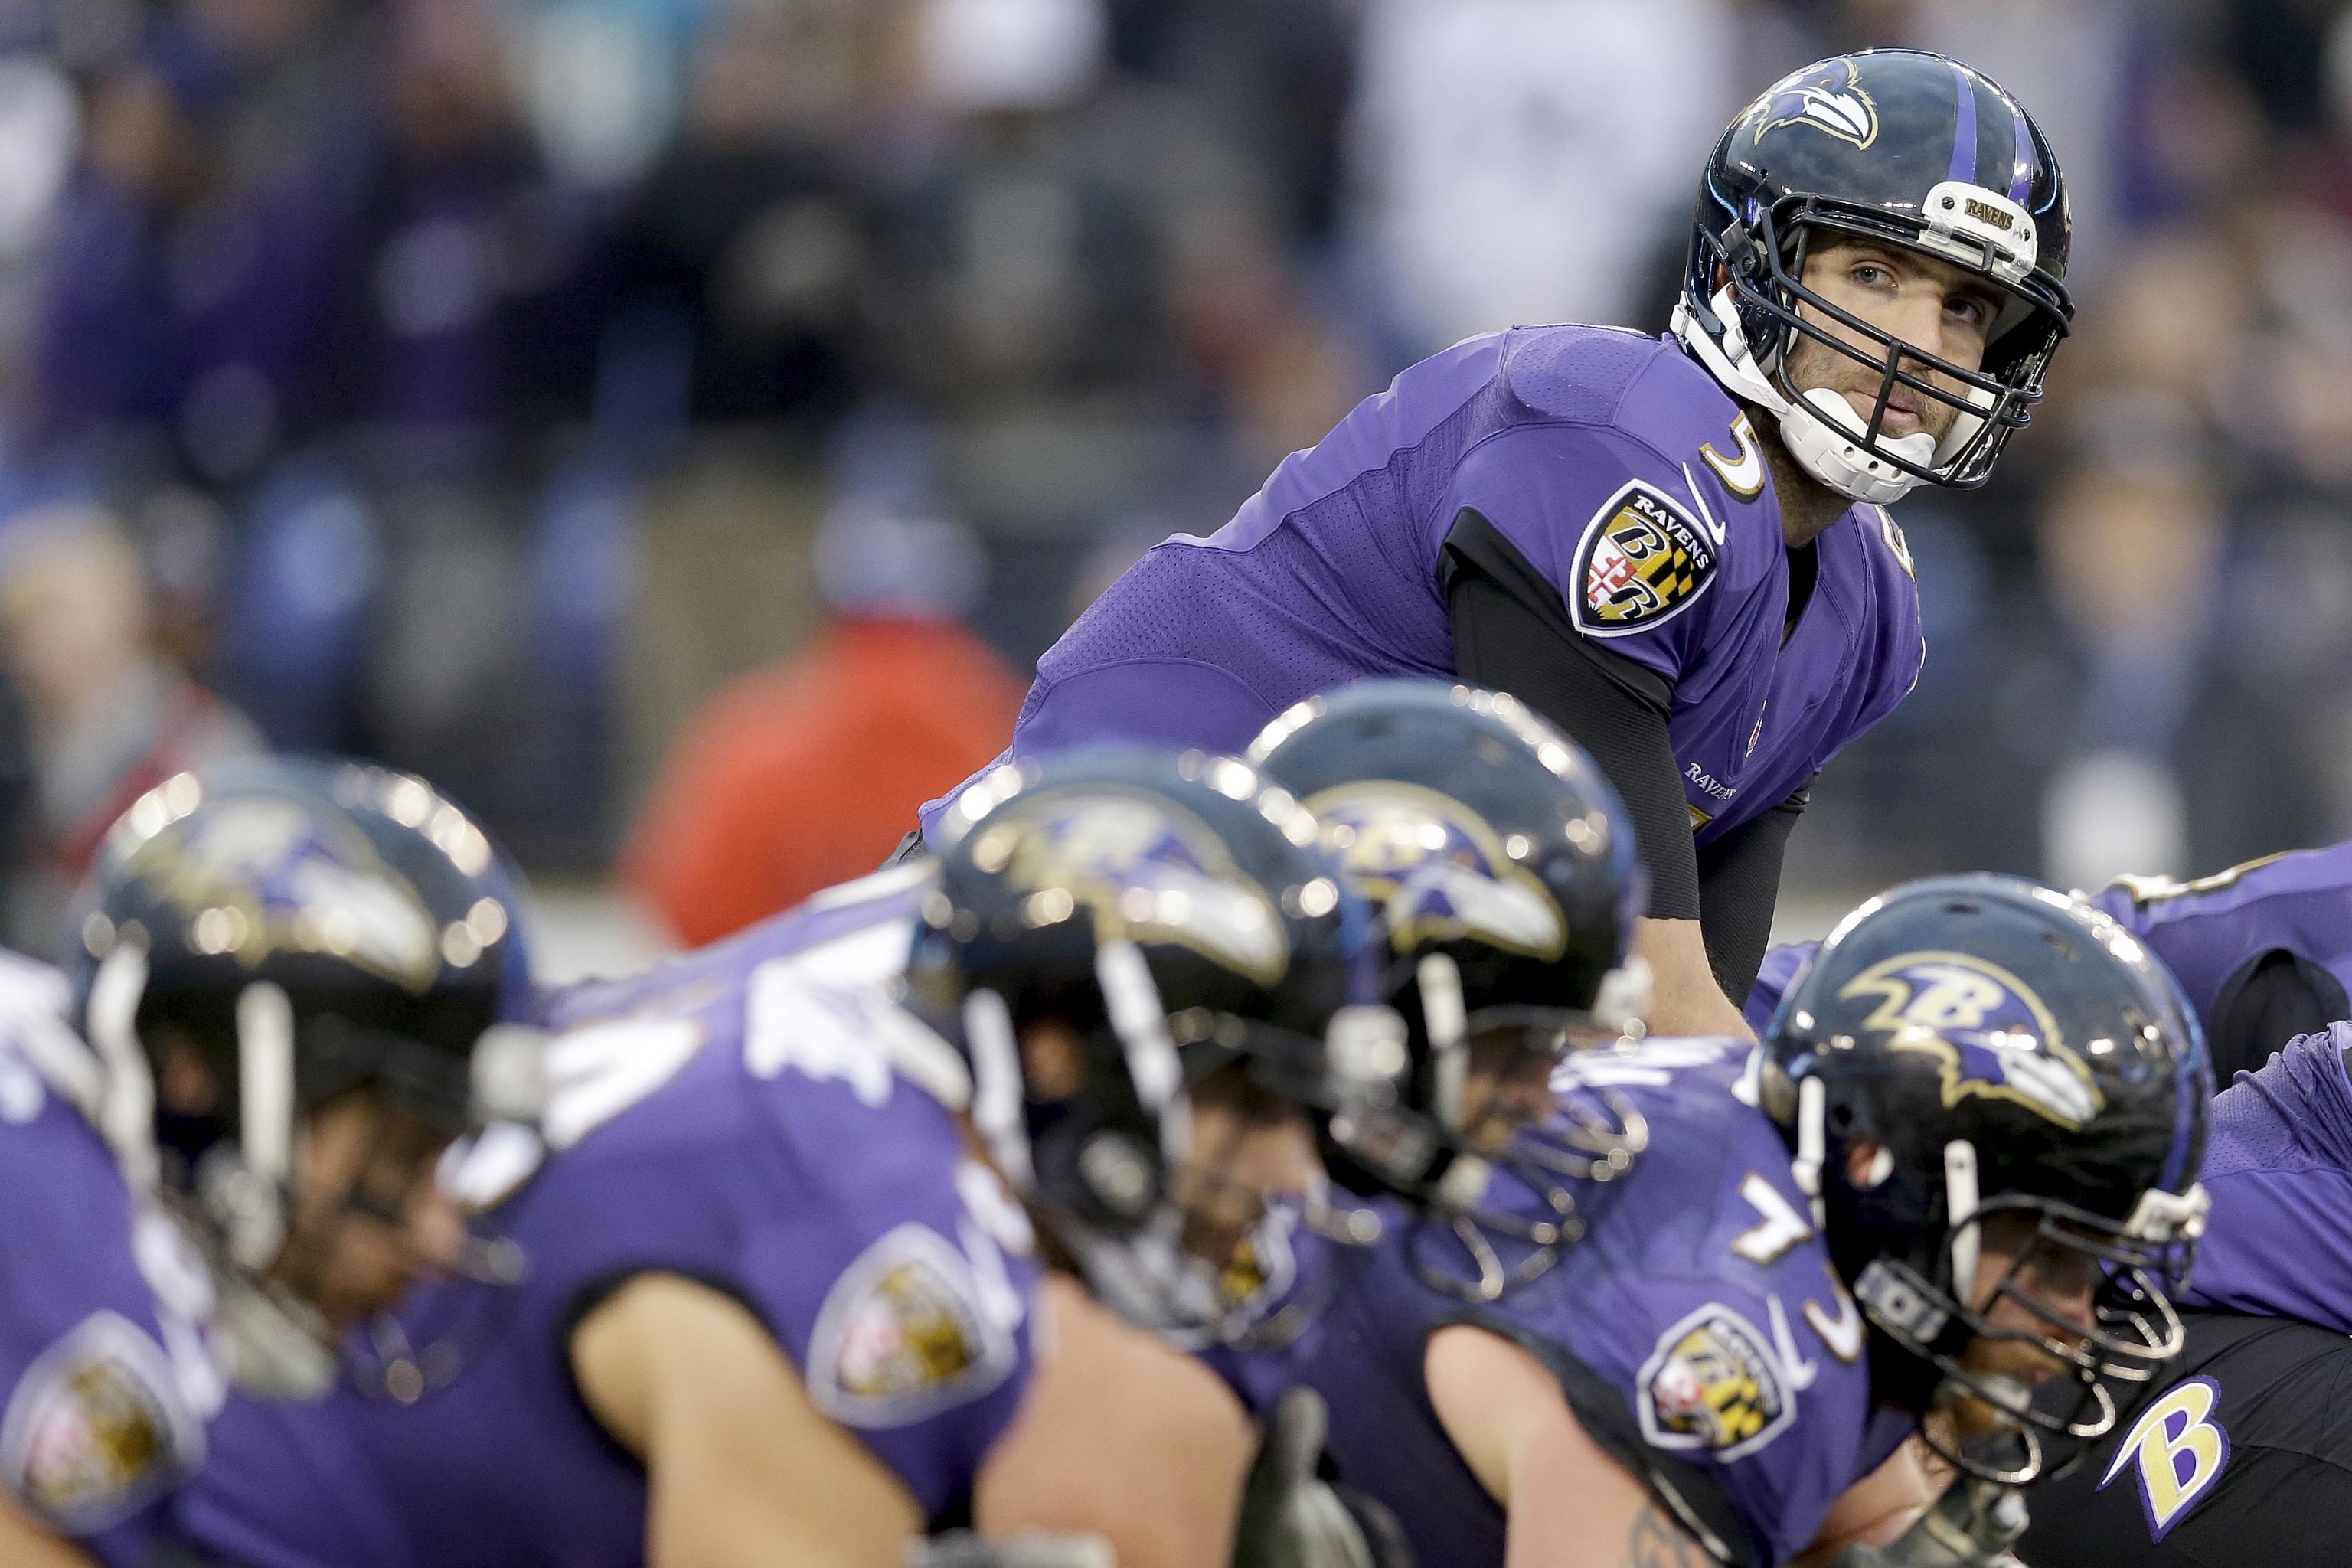 Jaguars vs. Ravens: What's the Game Plan for Baltimore?